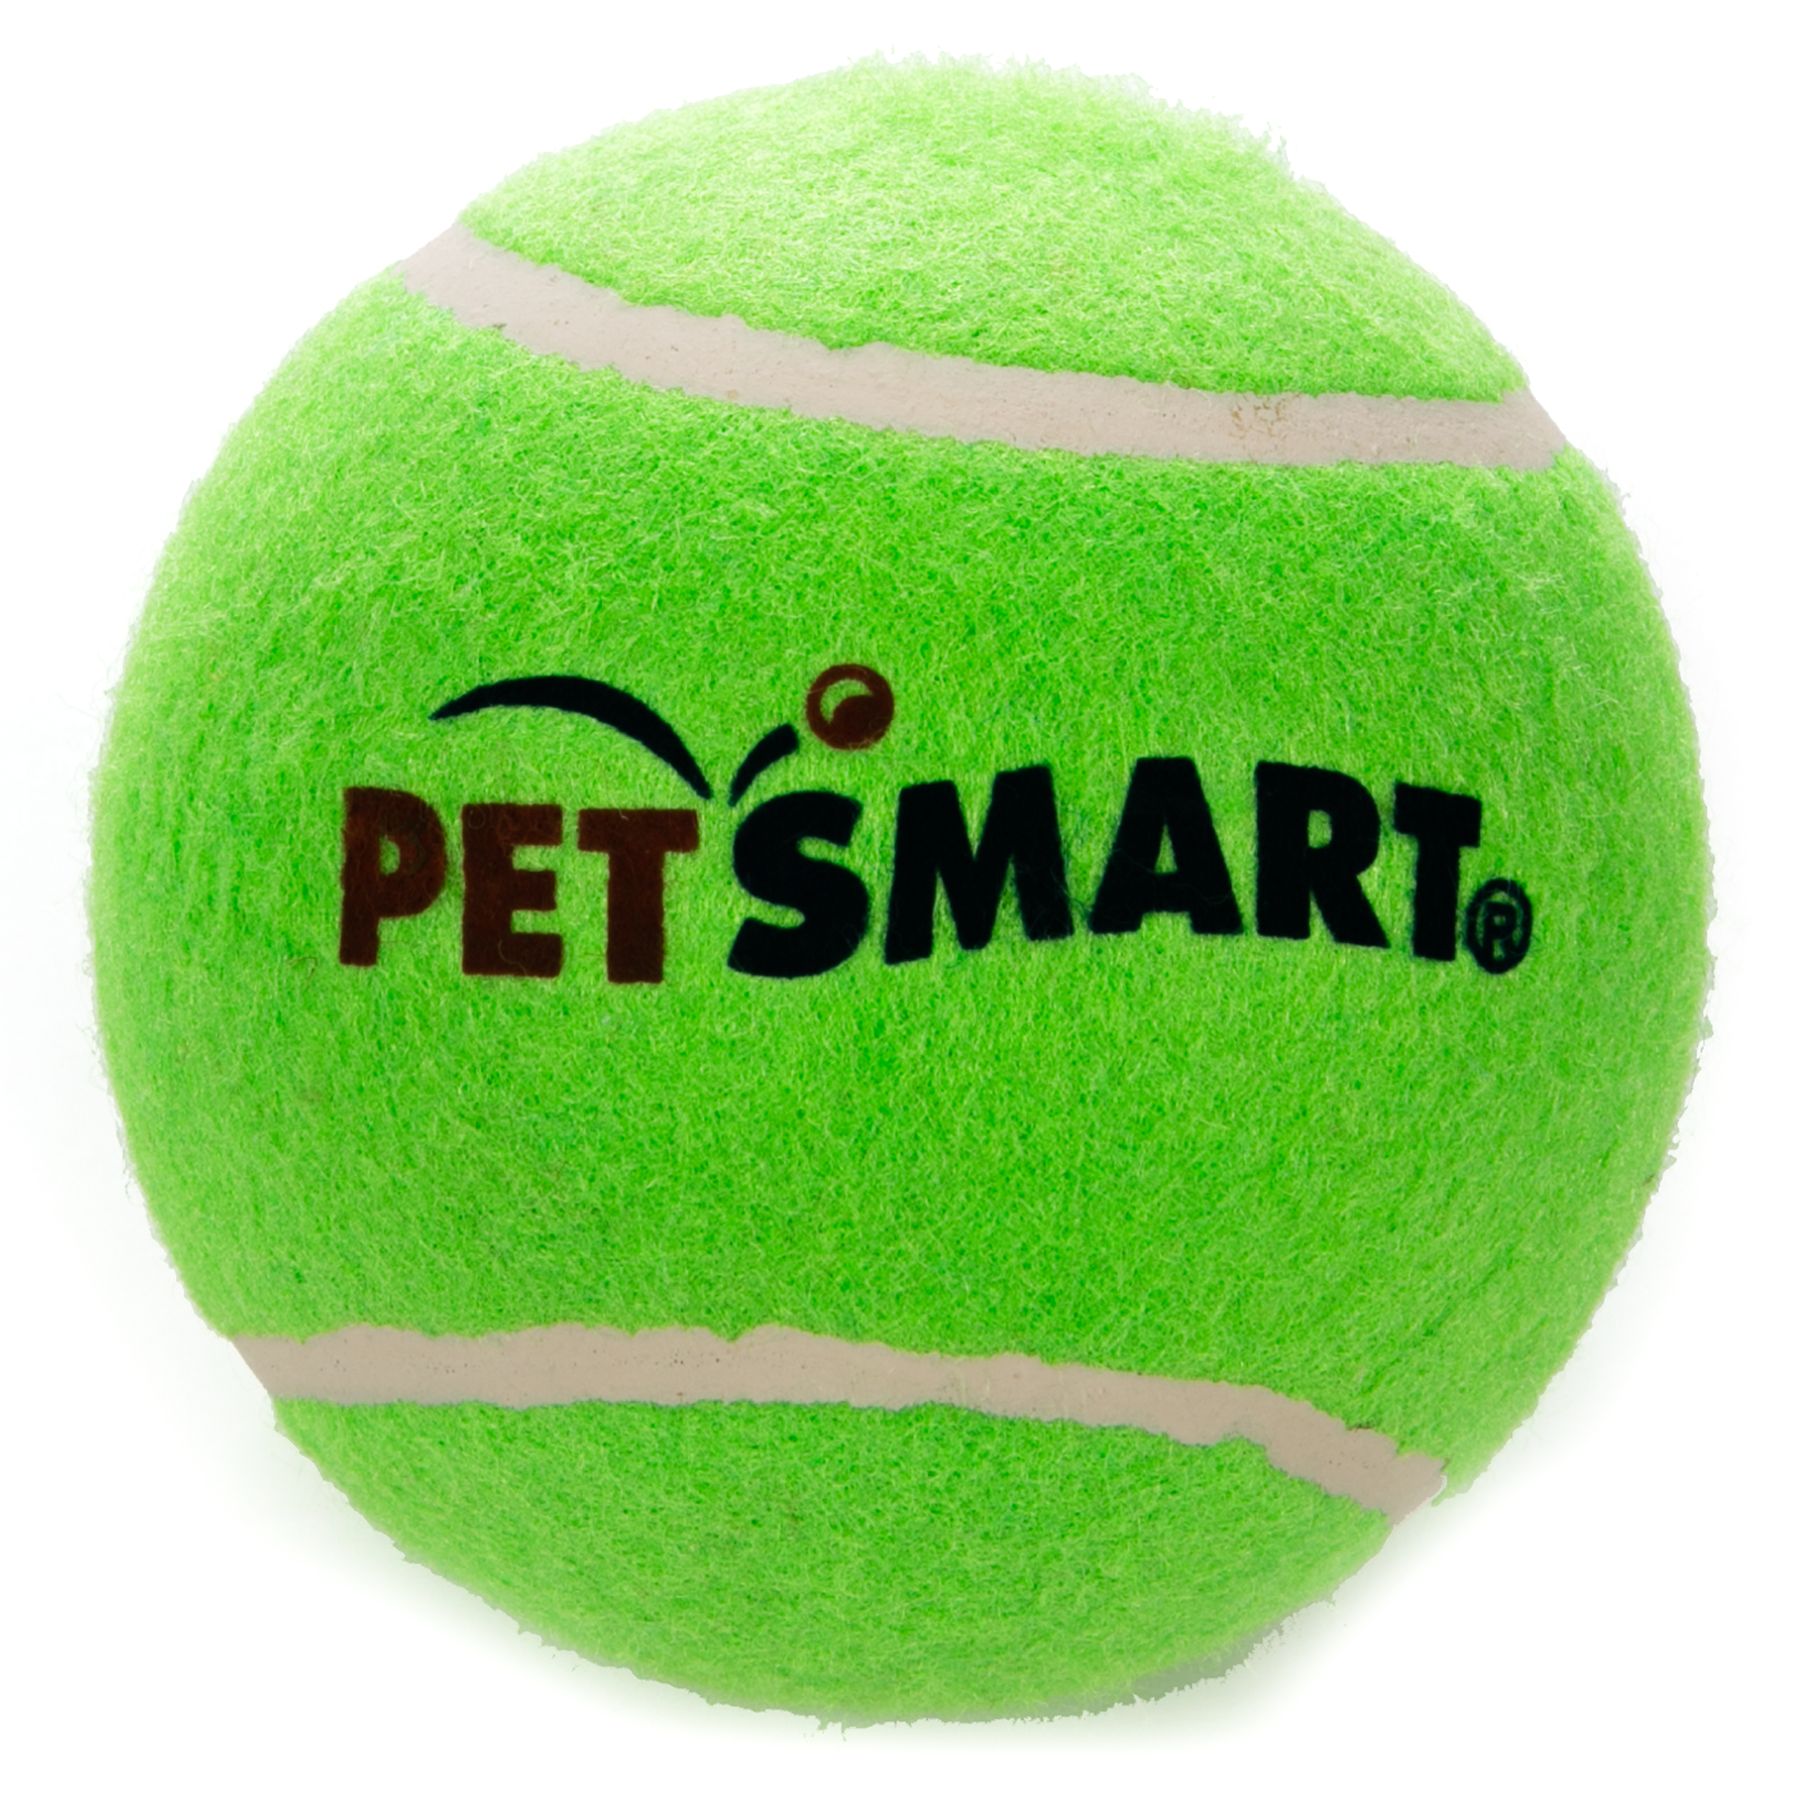 40 x Tennis Balls Bright Green For Pets Puppy Play Dog Toys Bouncing Ball By AQS 